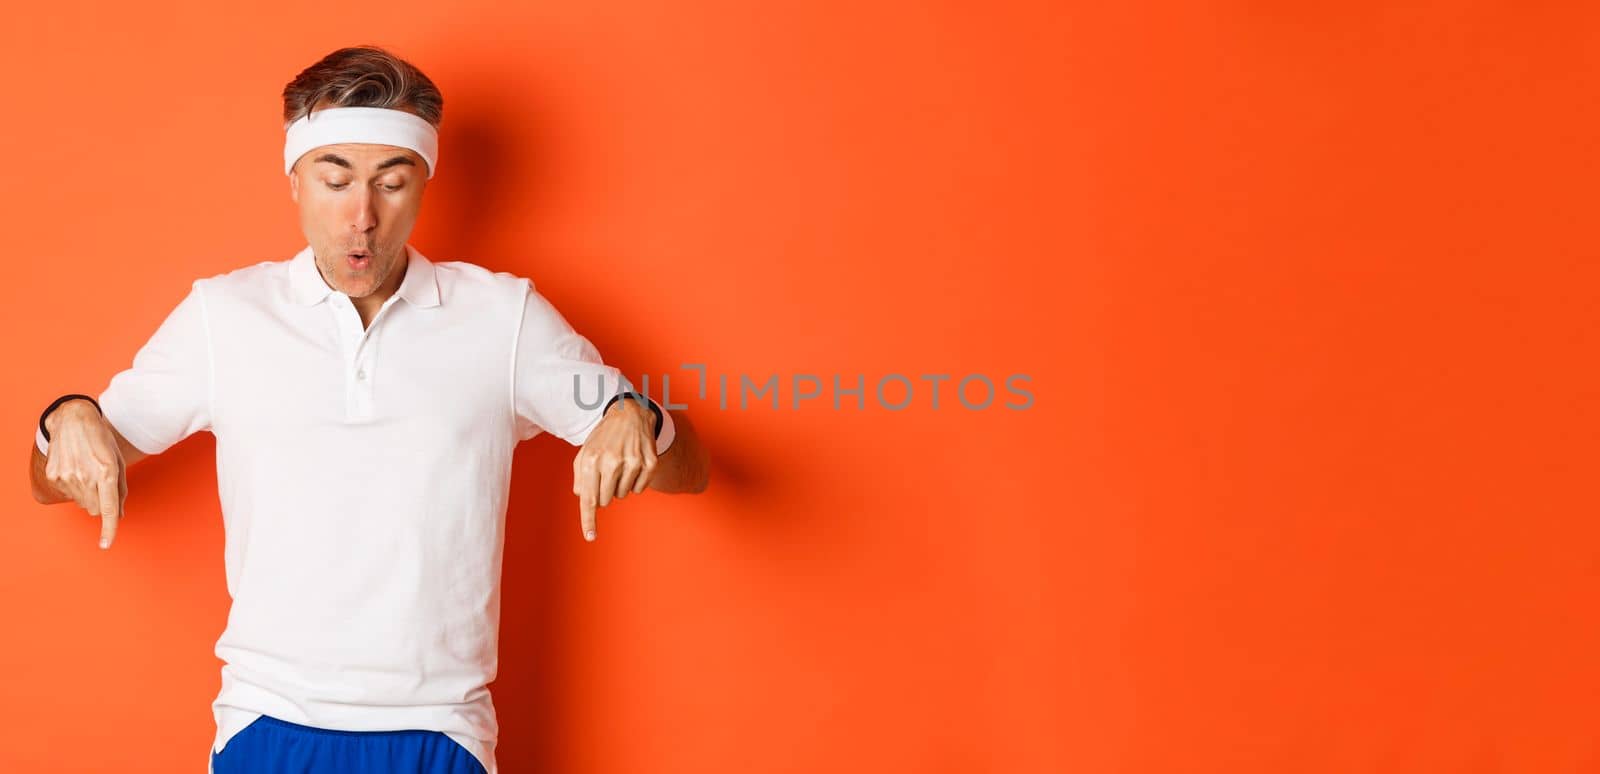 Concept of workout, sports and lifestyle. Amazed and excited middle-aged sportsman in fitness clothing, pointing fingers down and looking amused at logo, standing over orange background.